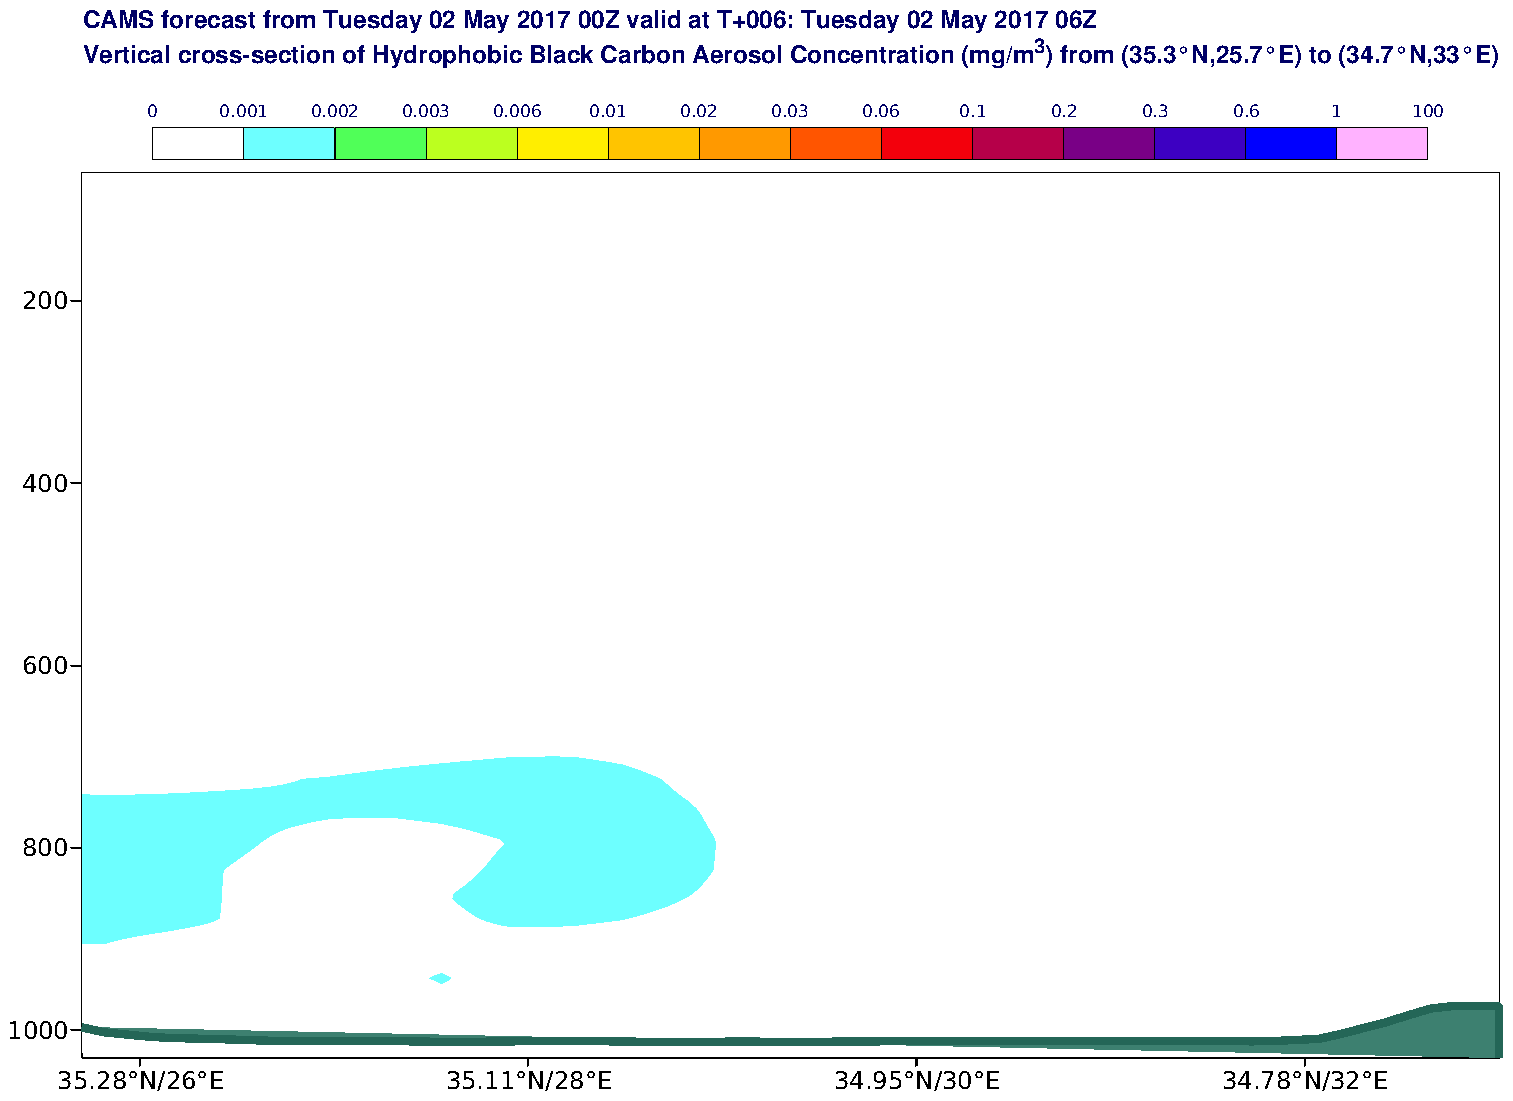 Vertical cross-section of Hydrophobic Black Carbon Aerosol Concentration (mg/m3) valid at T6 - 2017-05-02 06:00